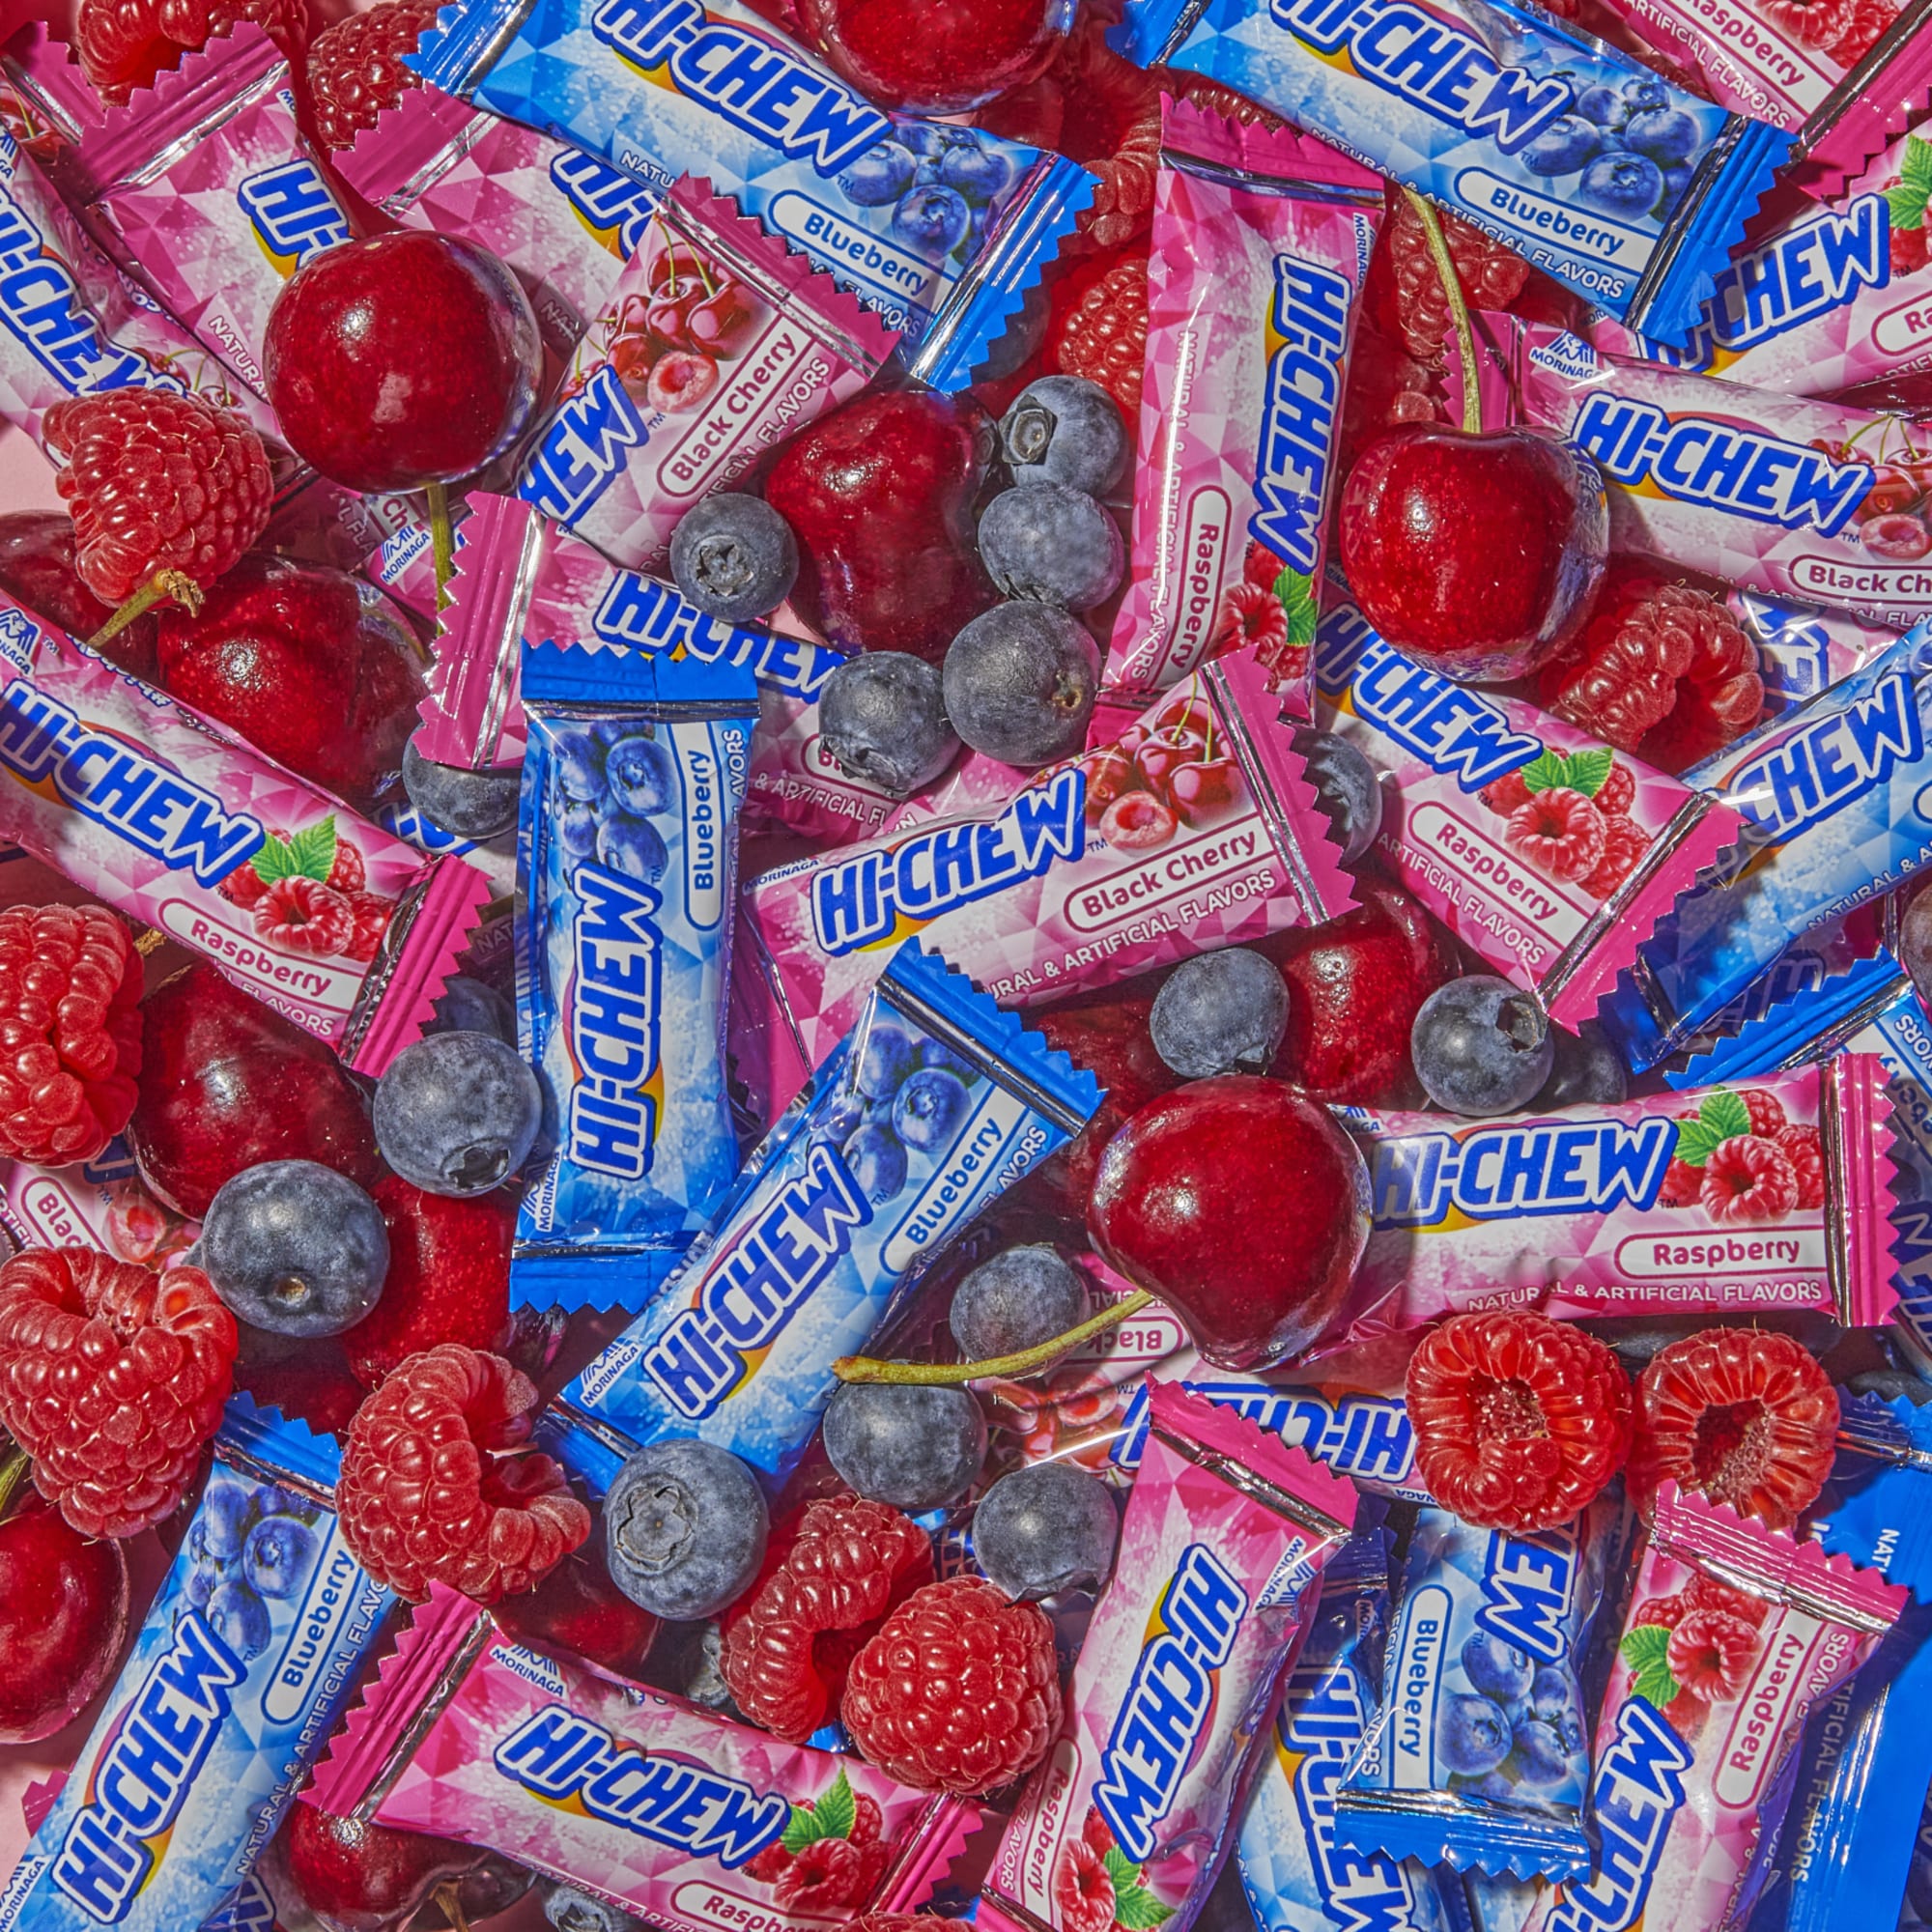 New HICHEW flavors review Where can you buy these?